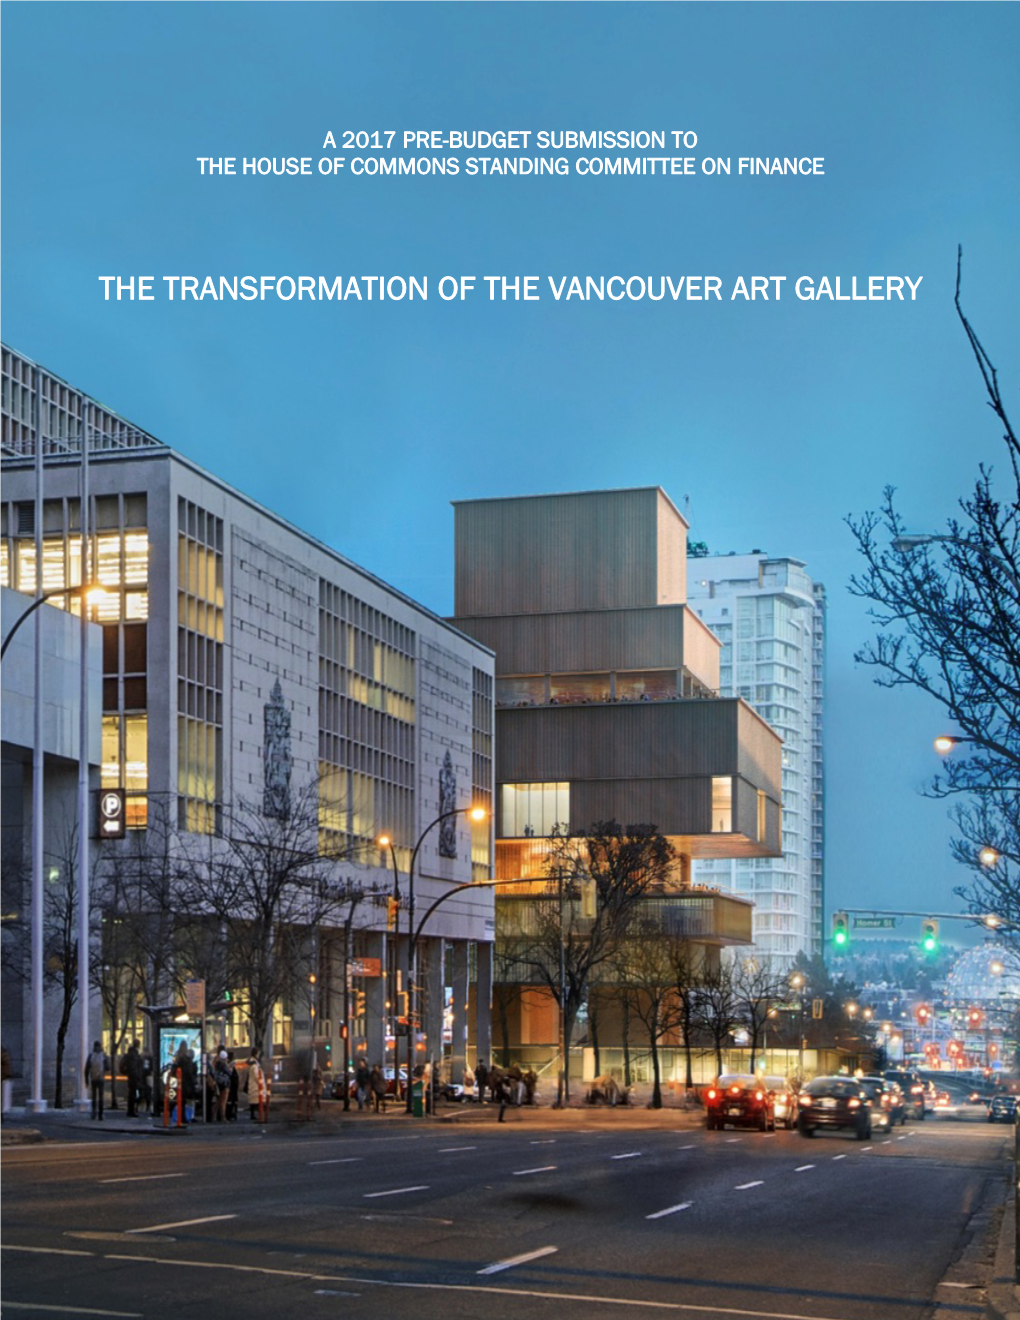 The Transformation of the Vancouver Art Gallery